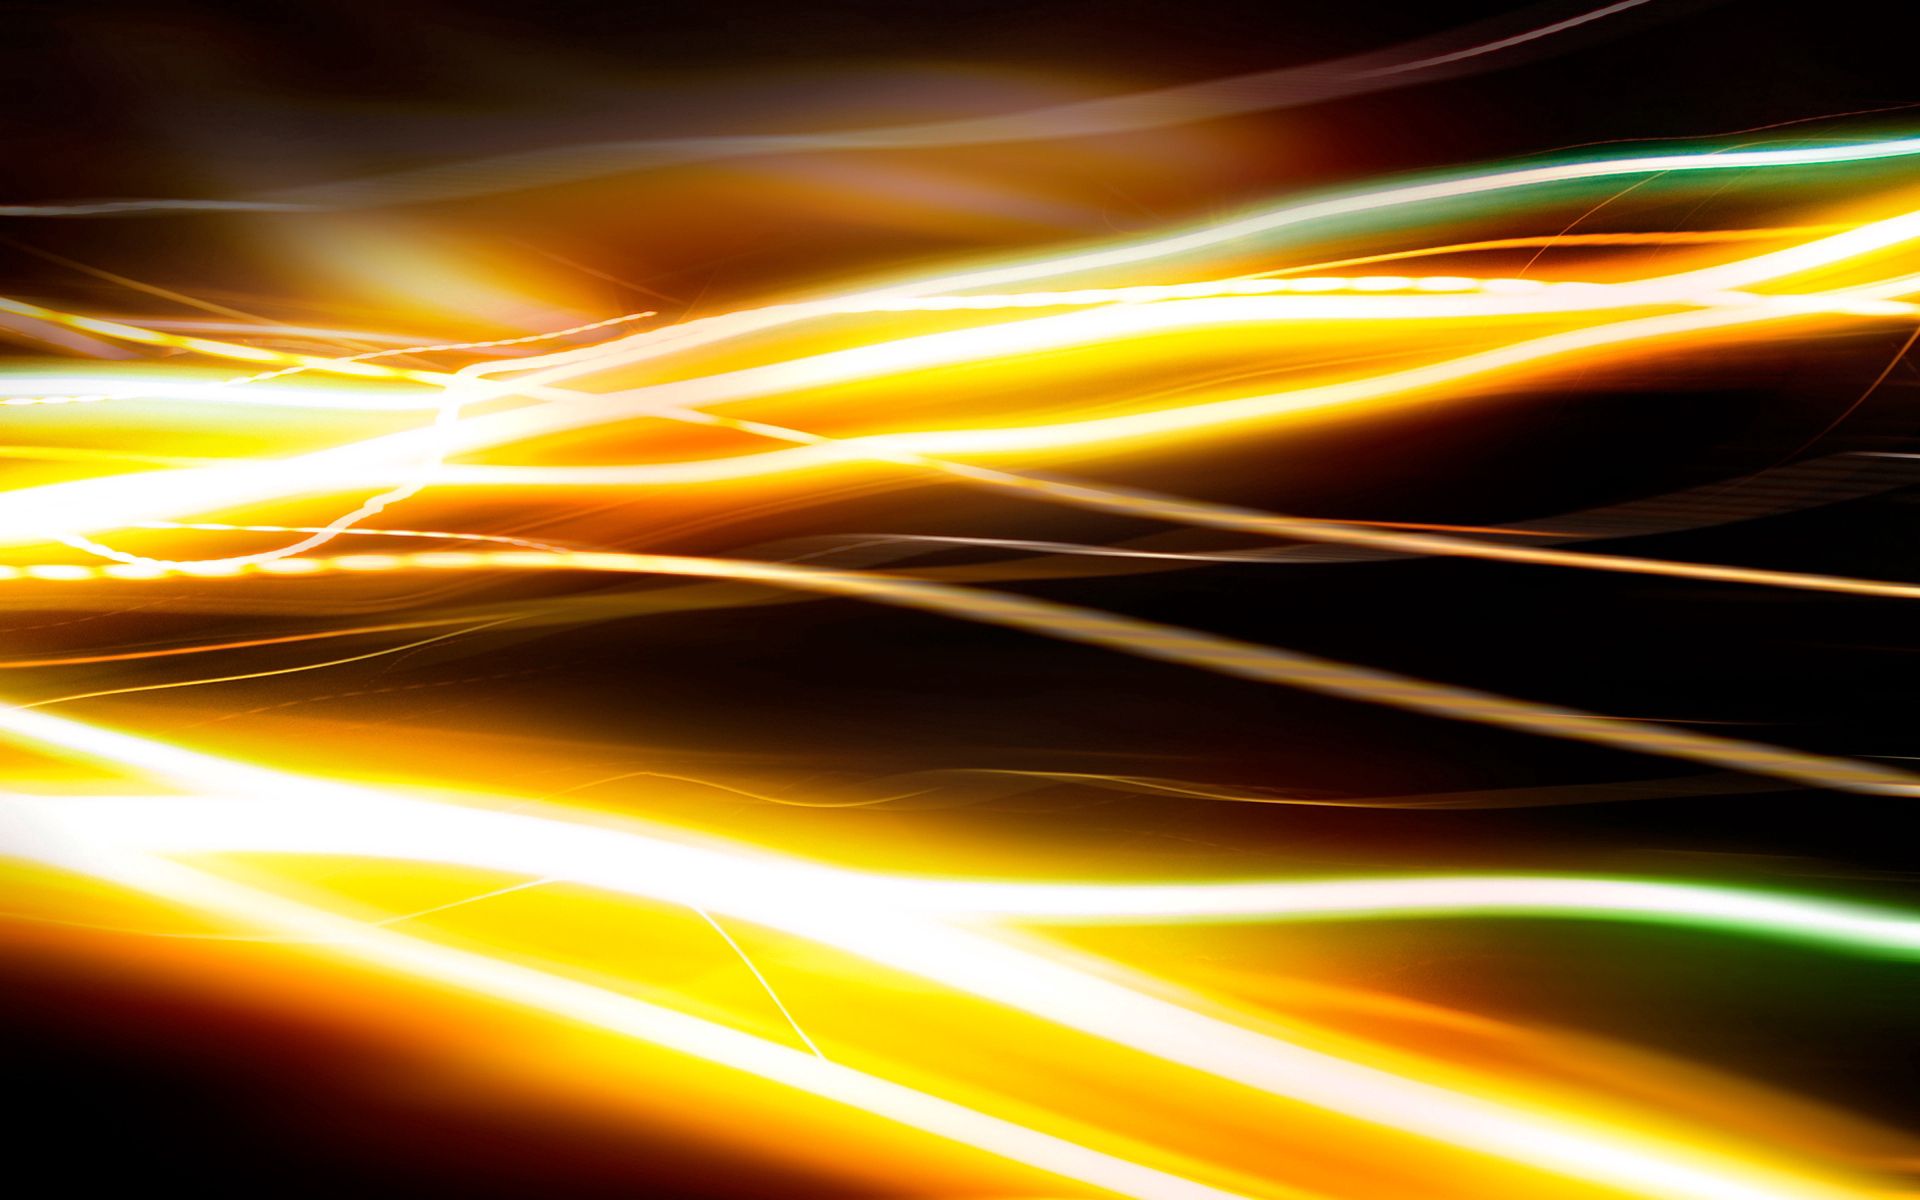 HD desktop wallpaper: Light, Beams, Rays, Abstract, Shine, Bright,  Brilliance download free picture #113227